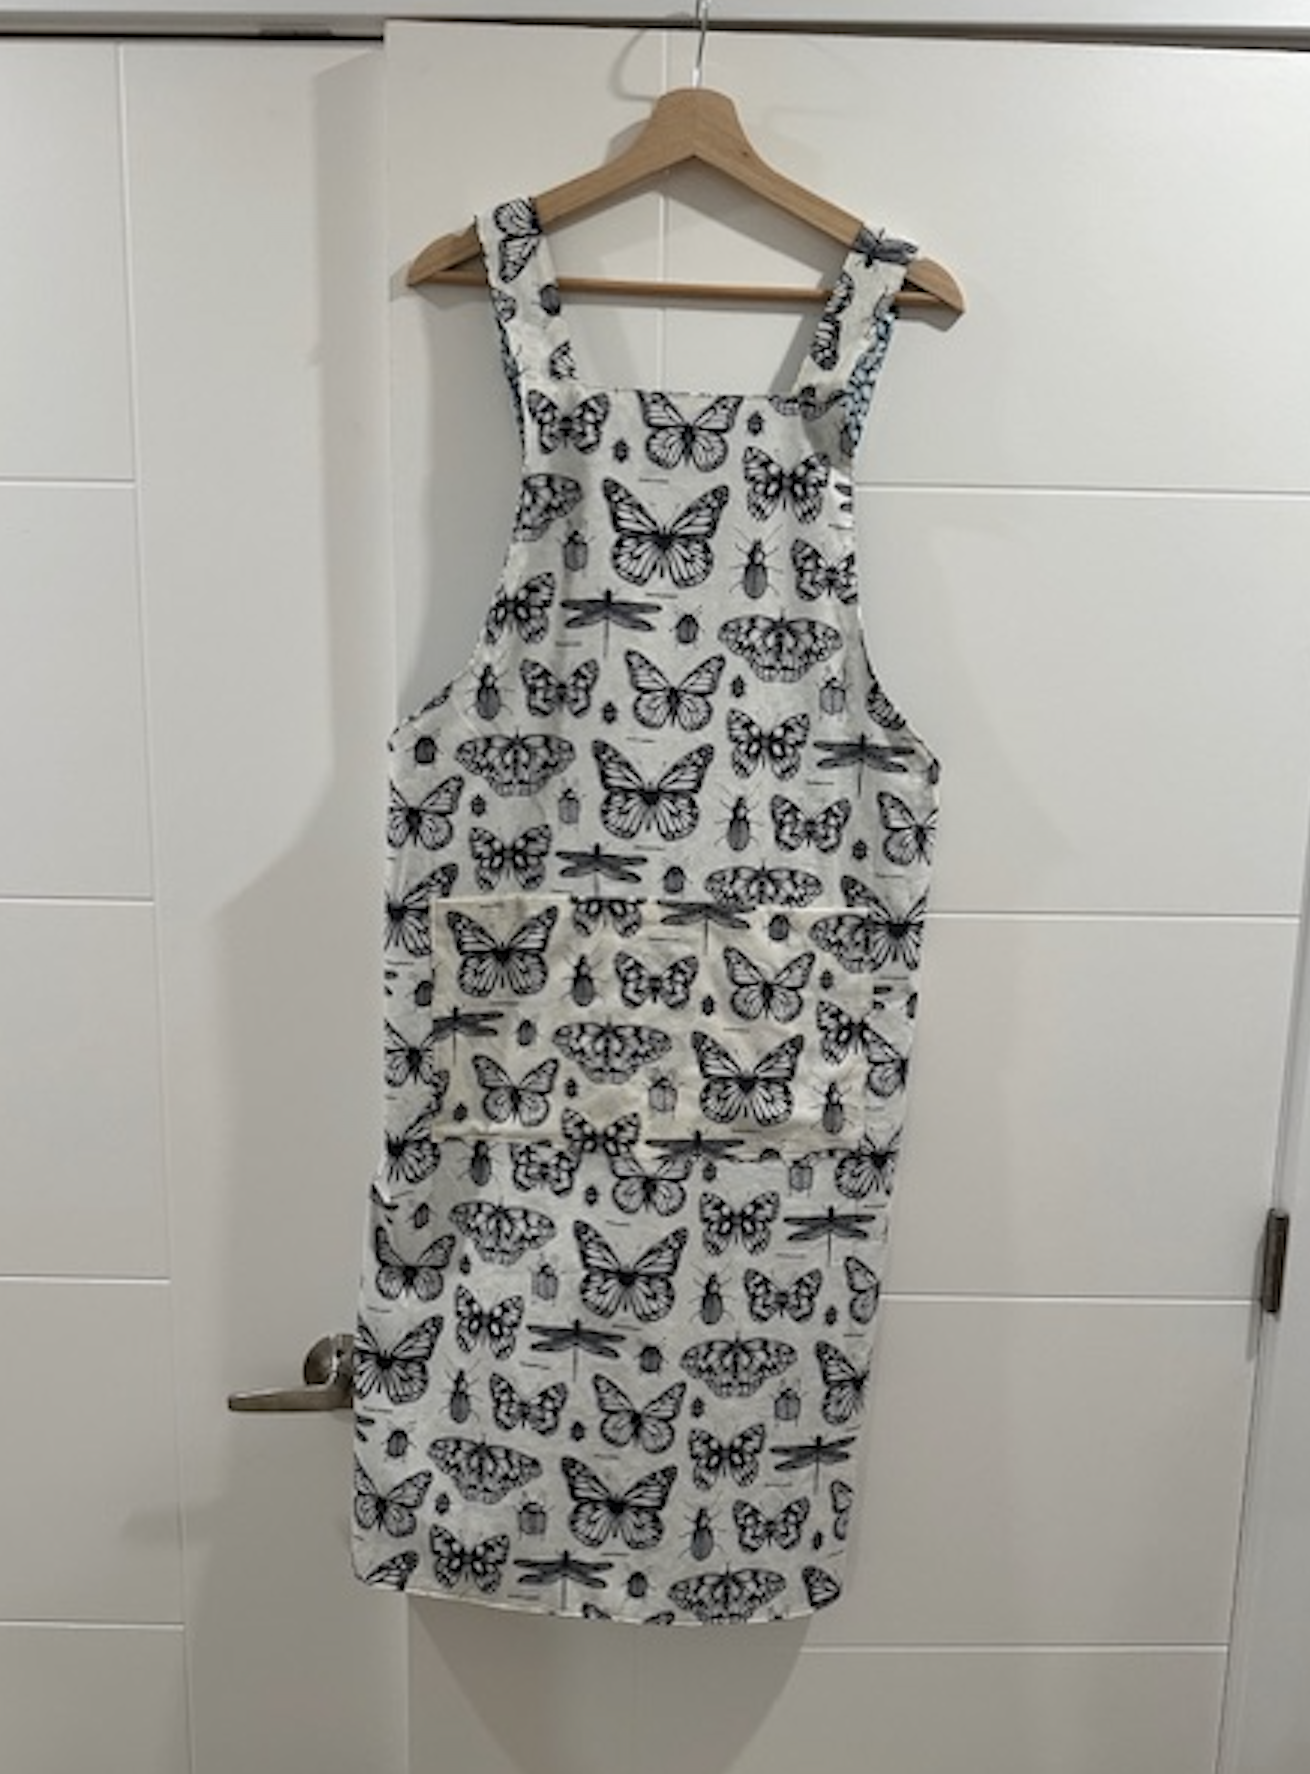 buy reversible handmade vintage fabric aprons online in canada from wild bluebell homestead for sourdough bread baking at home in your kitchen 74329